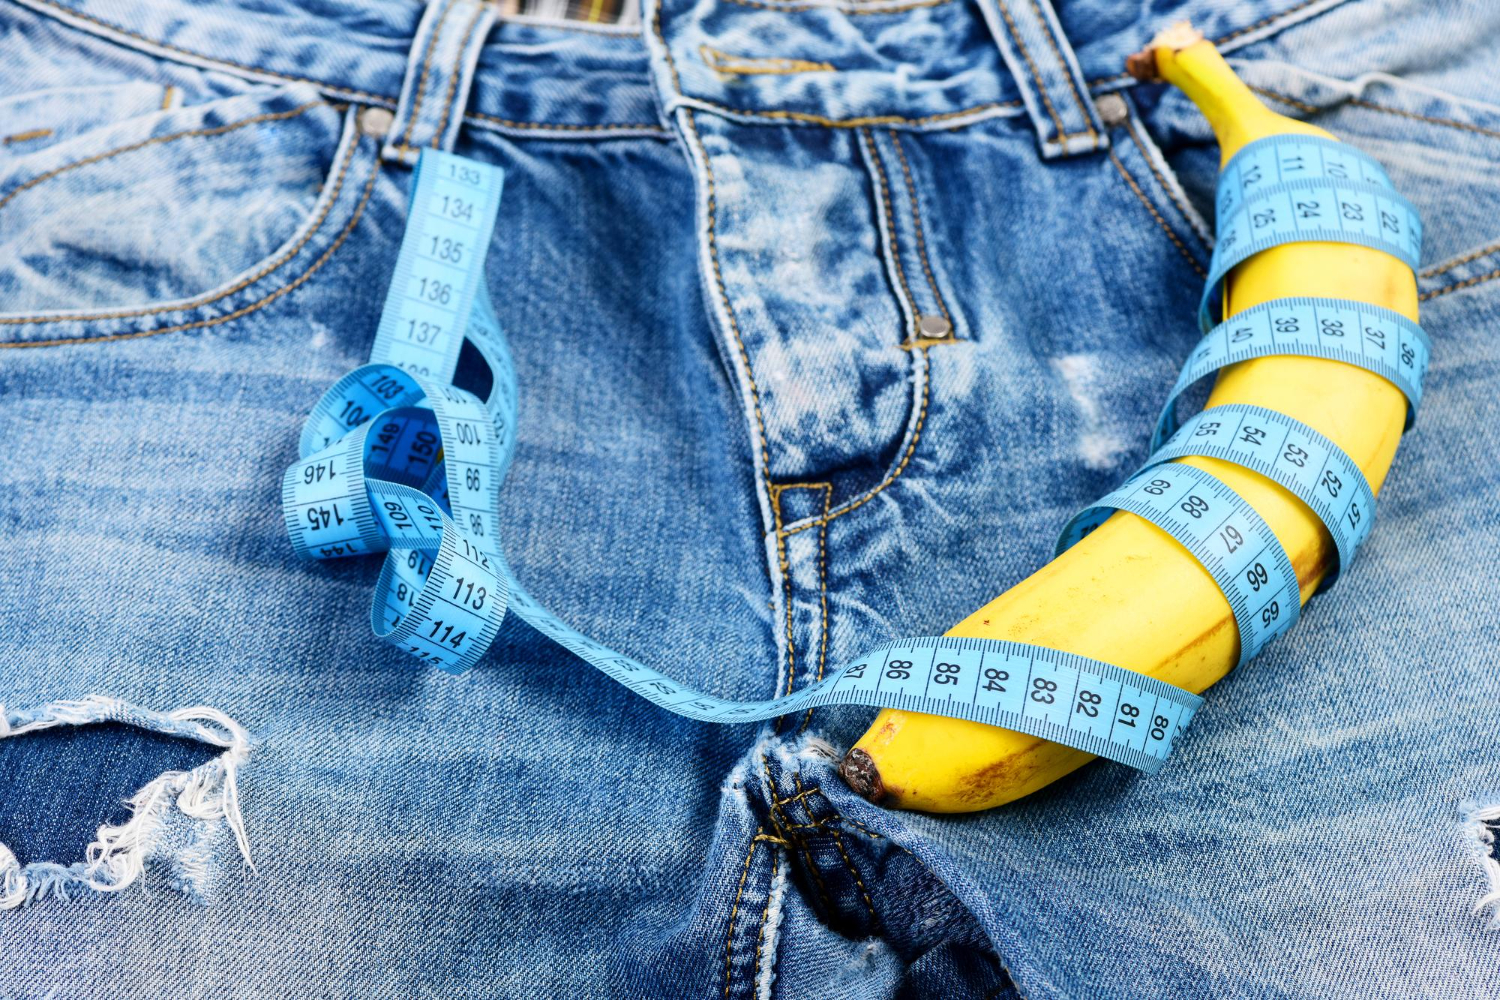 banana wrapped with blue measure tape jeans crotch